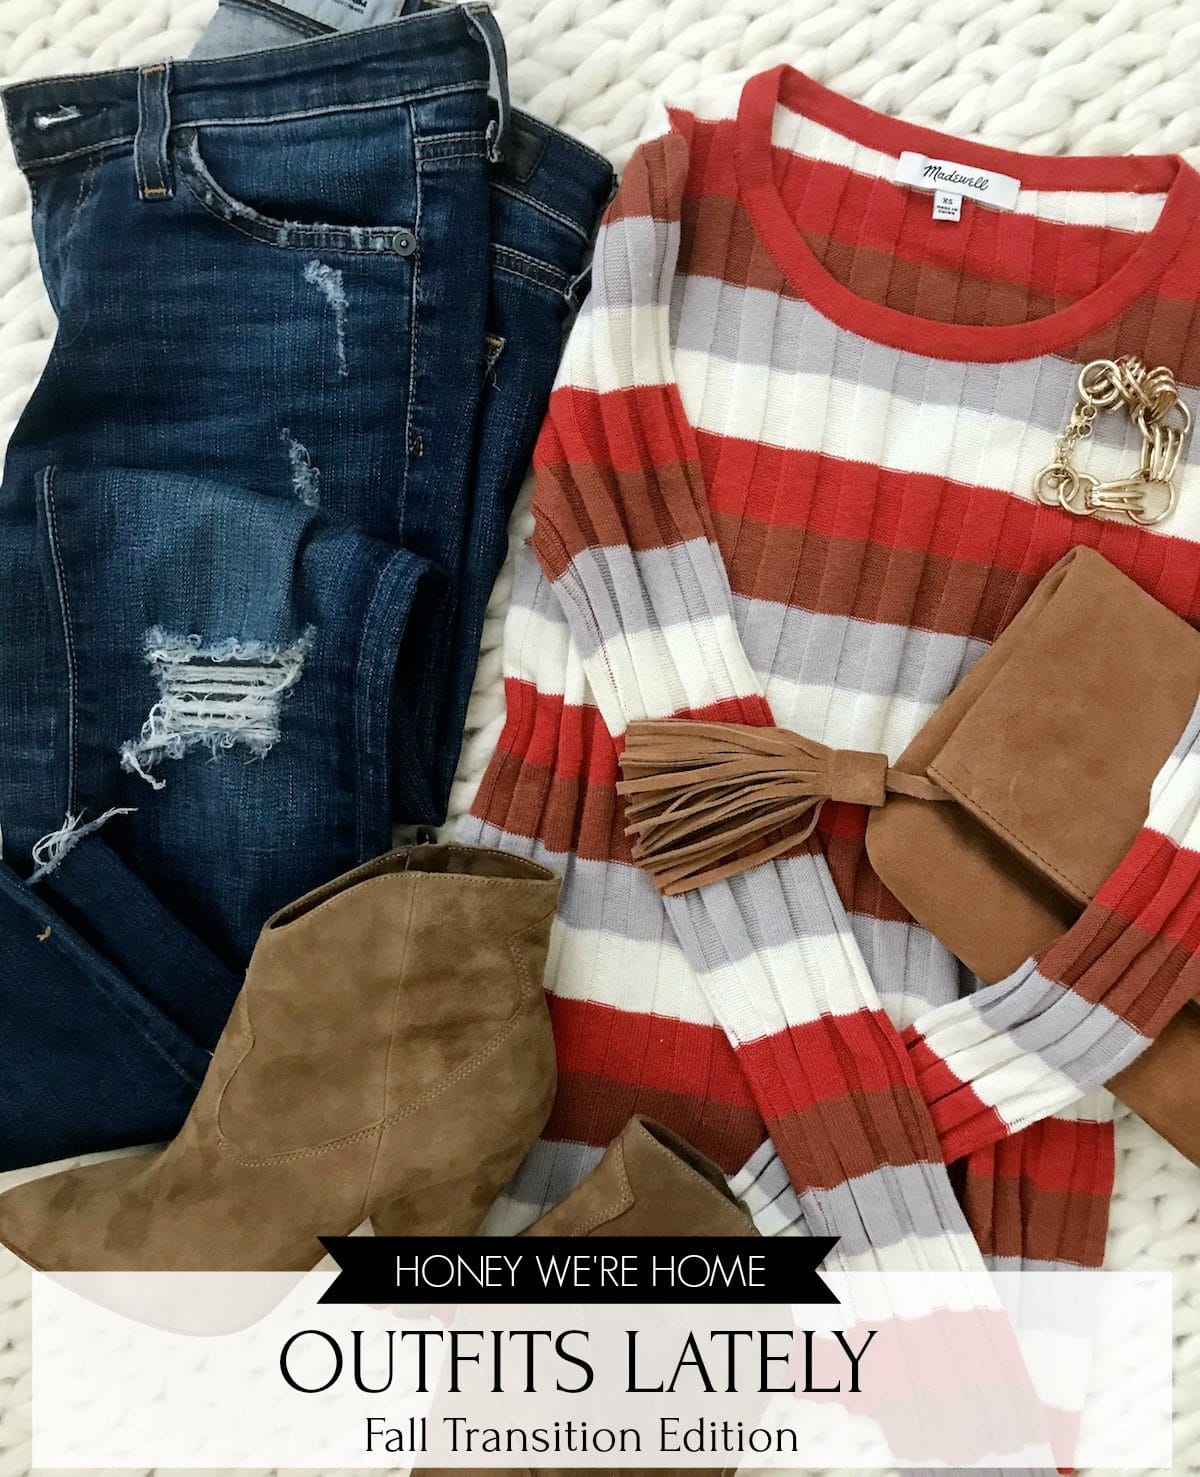 Cute-Fall-Outfit-jeans-and-striped-sweater-1200x1477-2